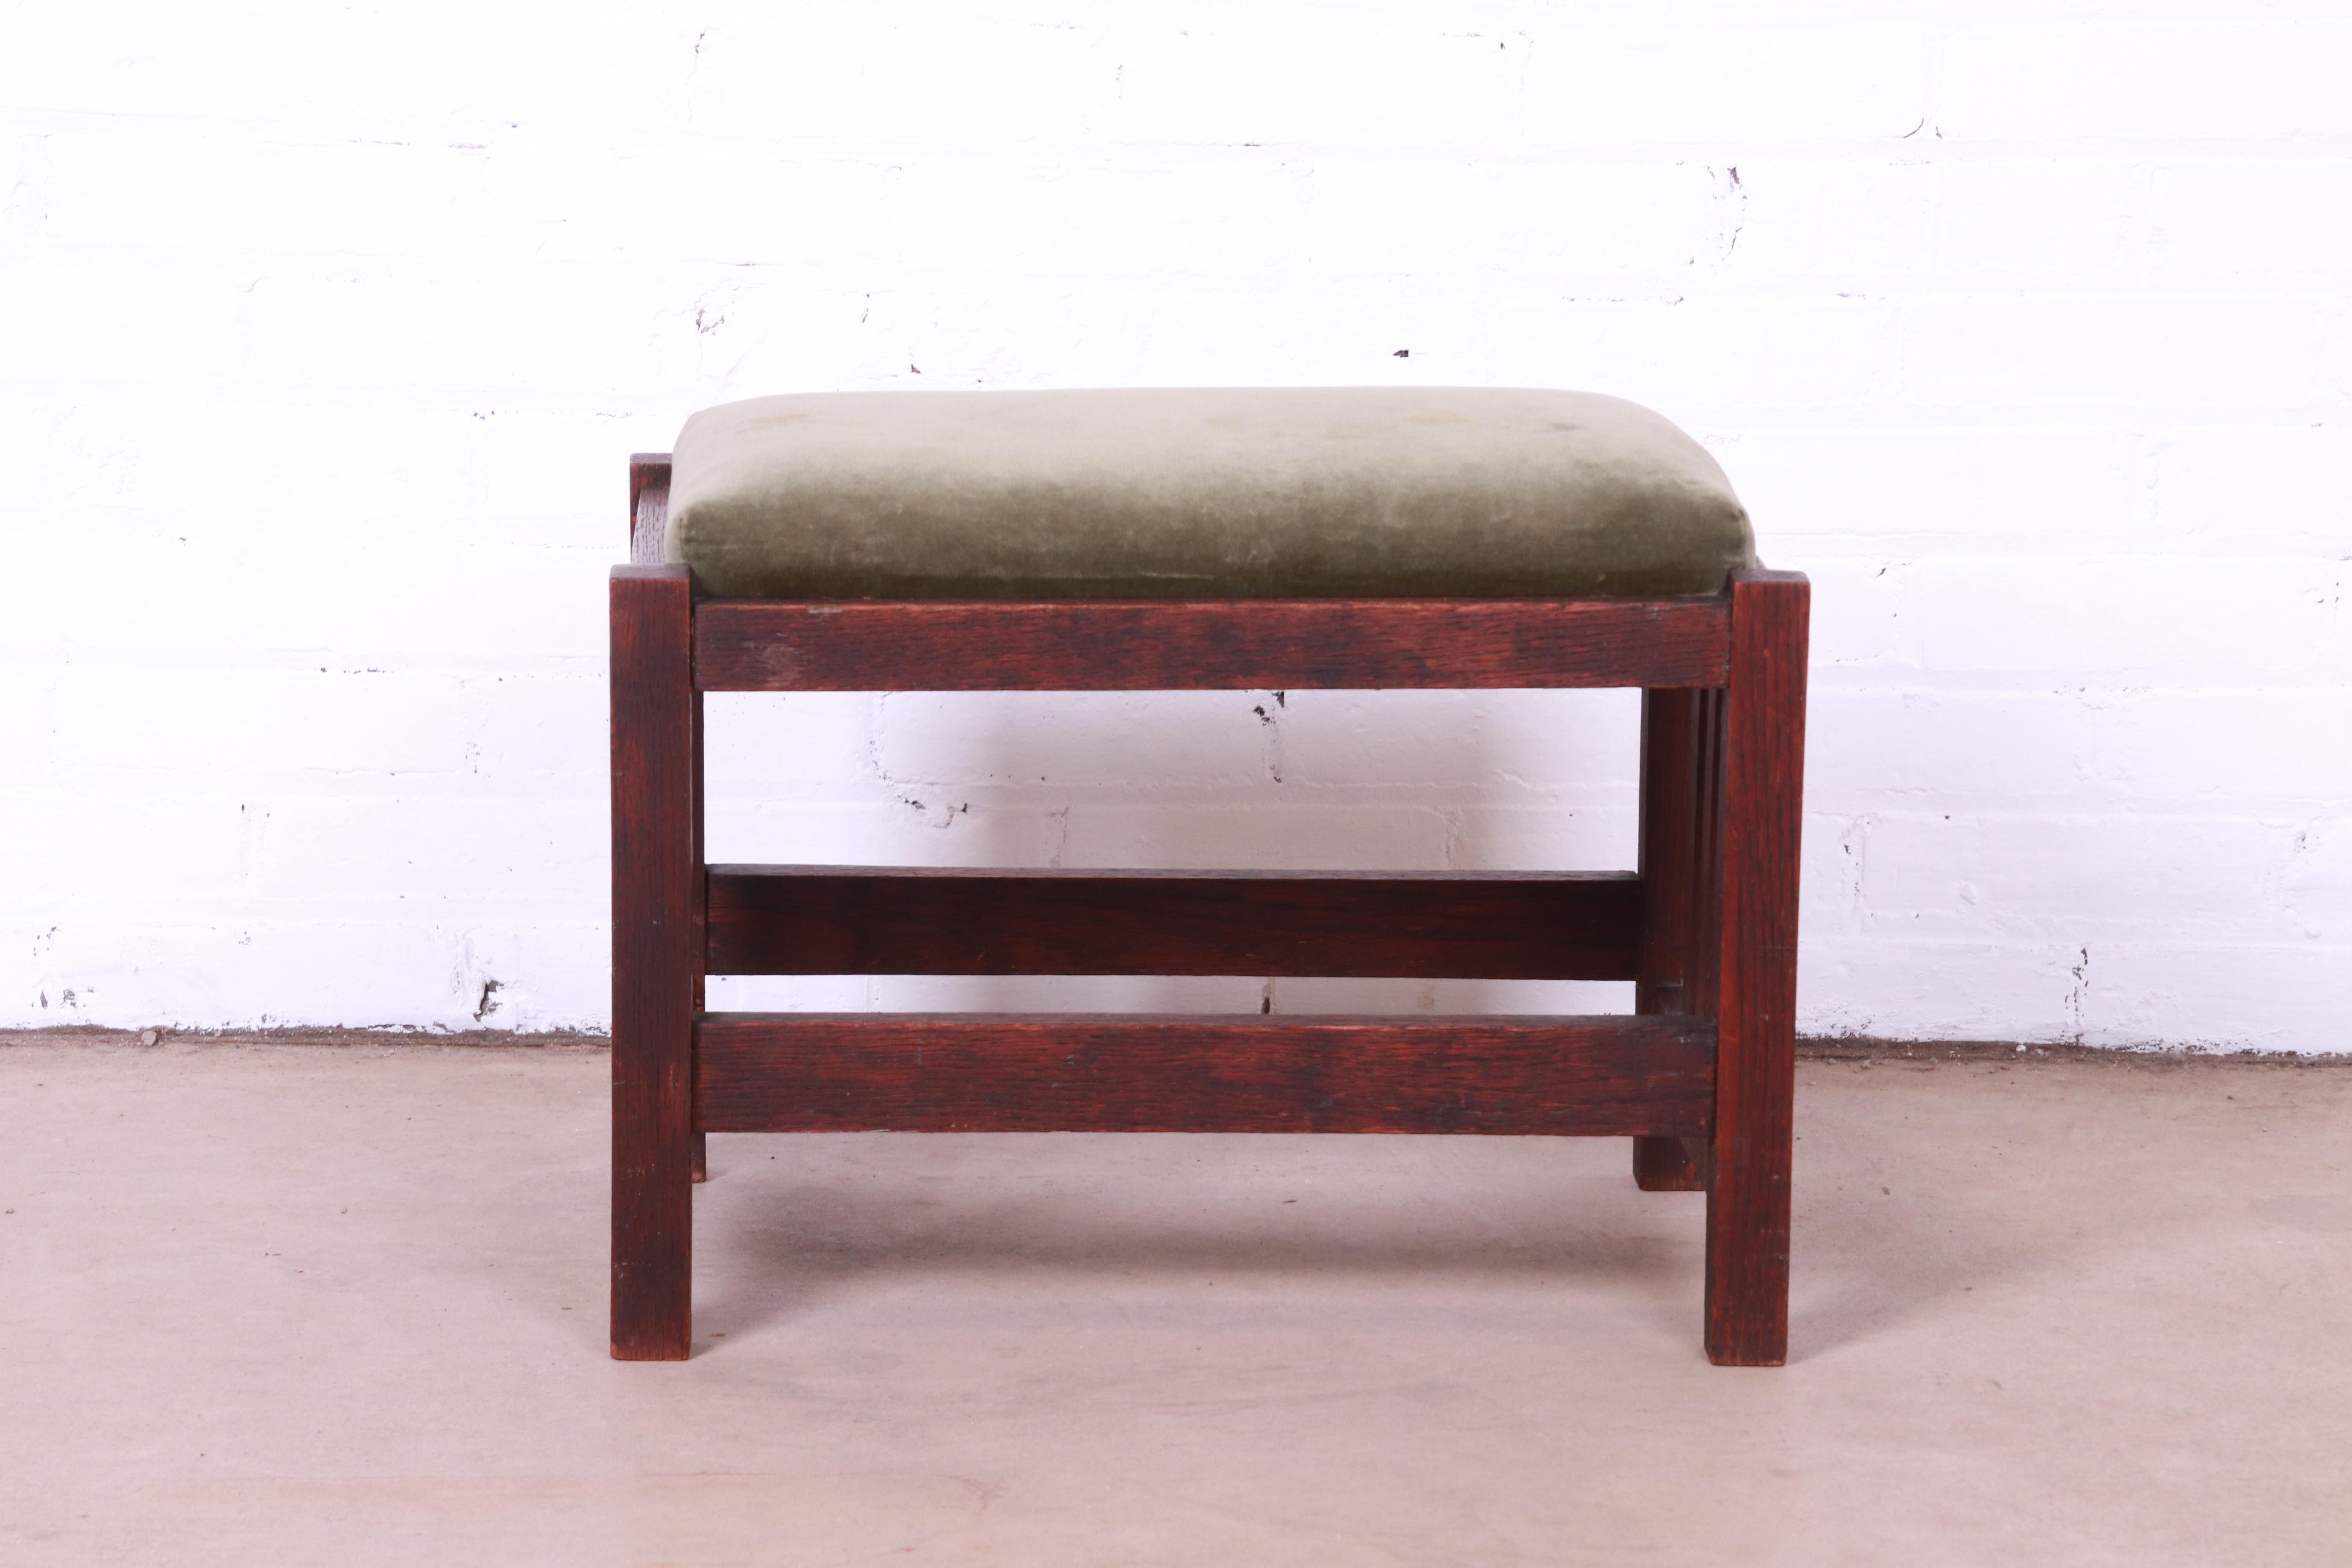 A gorgeous antique Mission Arts & Crafts period footstool or ottoman.

Recently procured from Frank Lloyd Wright's DeRhodes House.

Attributed to L. & J.G. Stickley

USA, Circa 1900

Solid oak, with green velvet upholstery.

Measures: